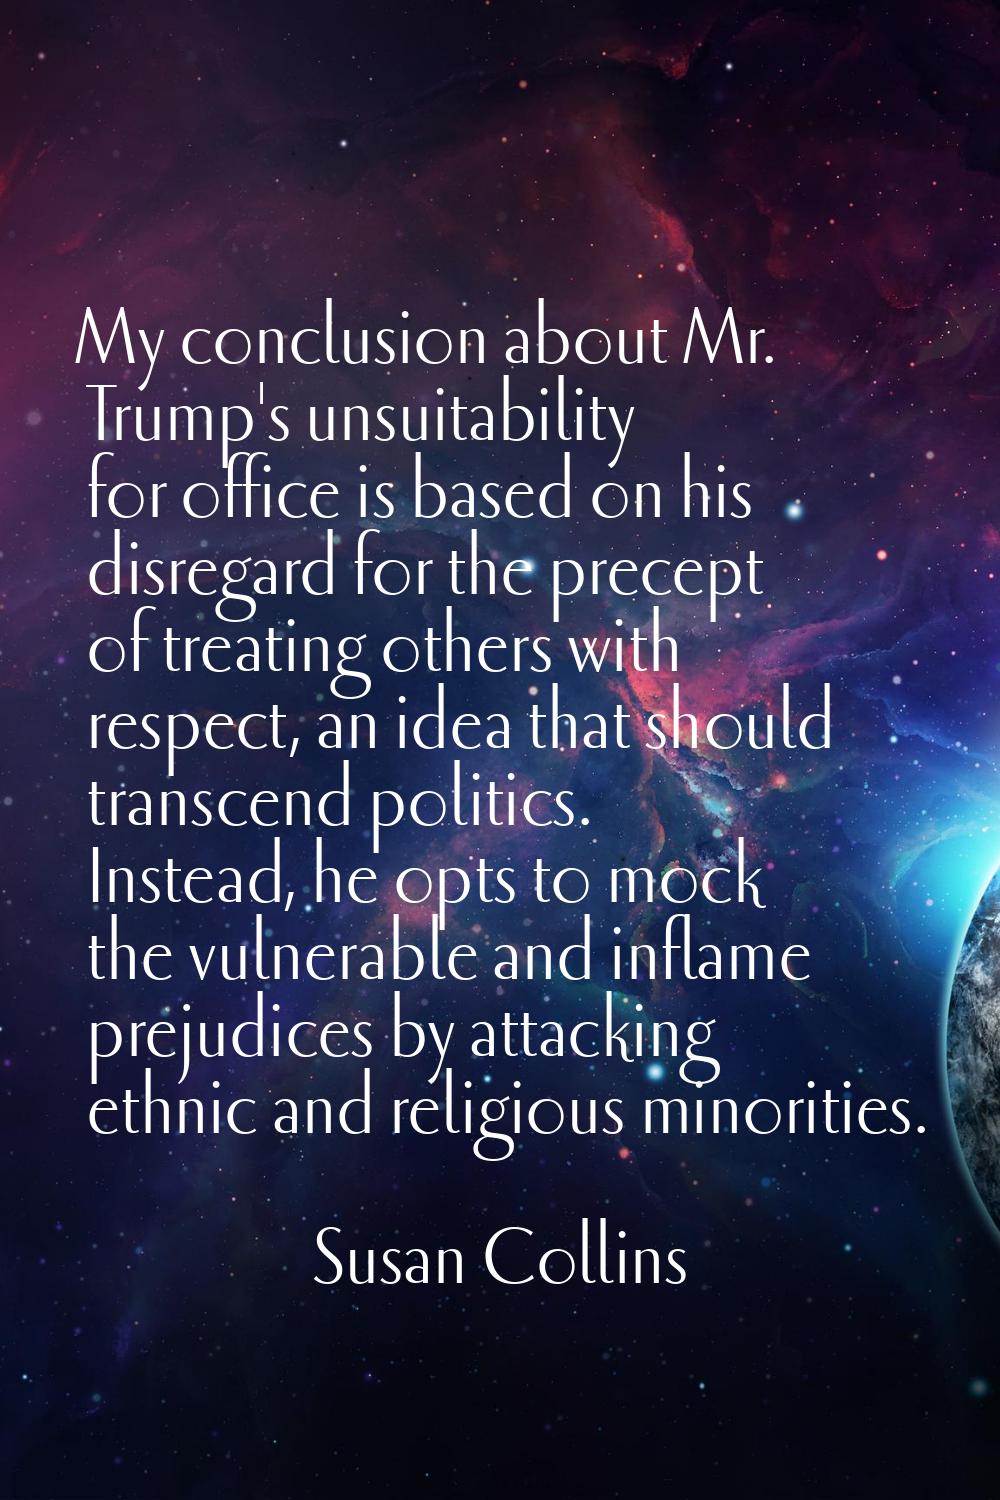 My conclusion about Mr. Trump's unsuitability for office is based on his disregard for the precept 